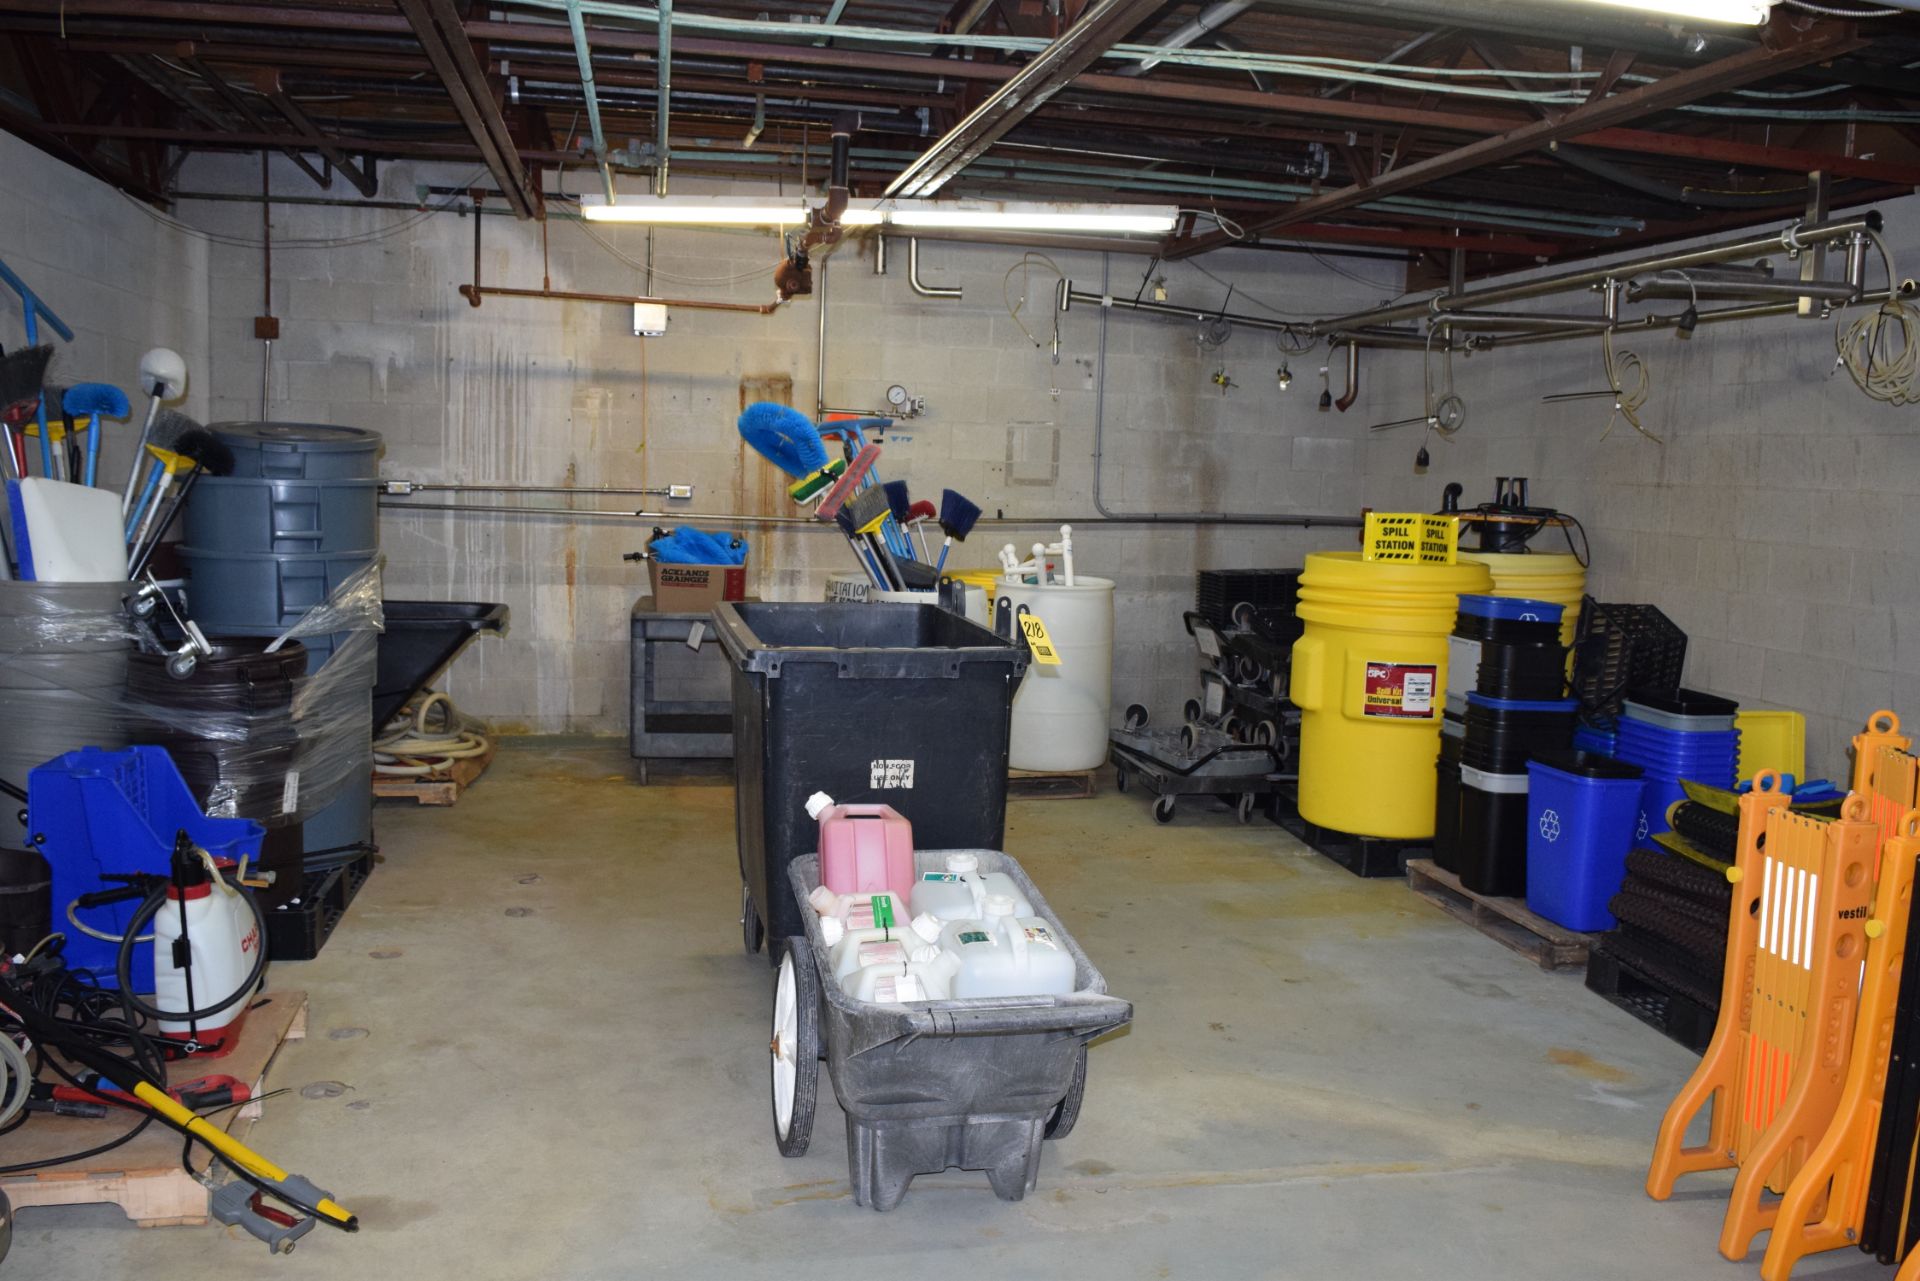 Assorted 4-Wheel Carts, Brooms, Waste Cans, Floor Mats, Buckets, Scoops, etc. Rigging Charge:300